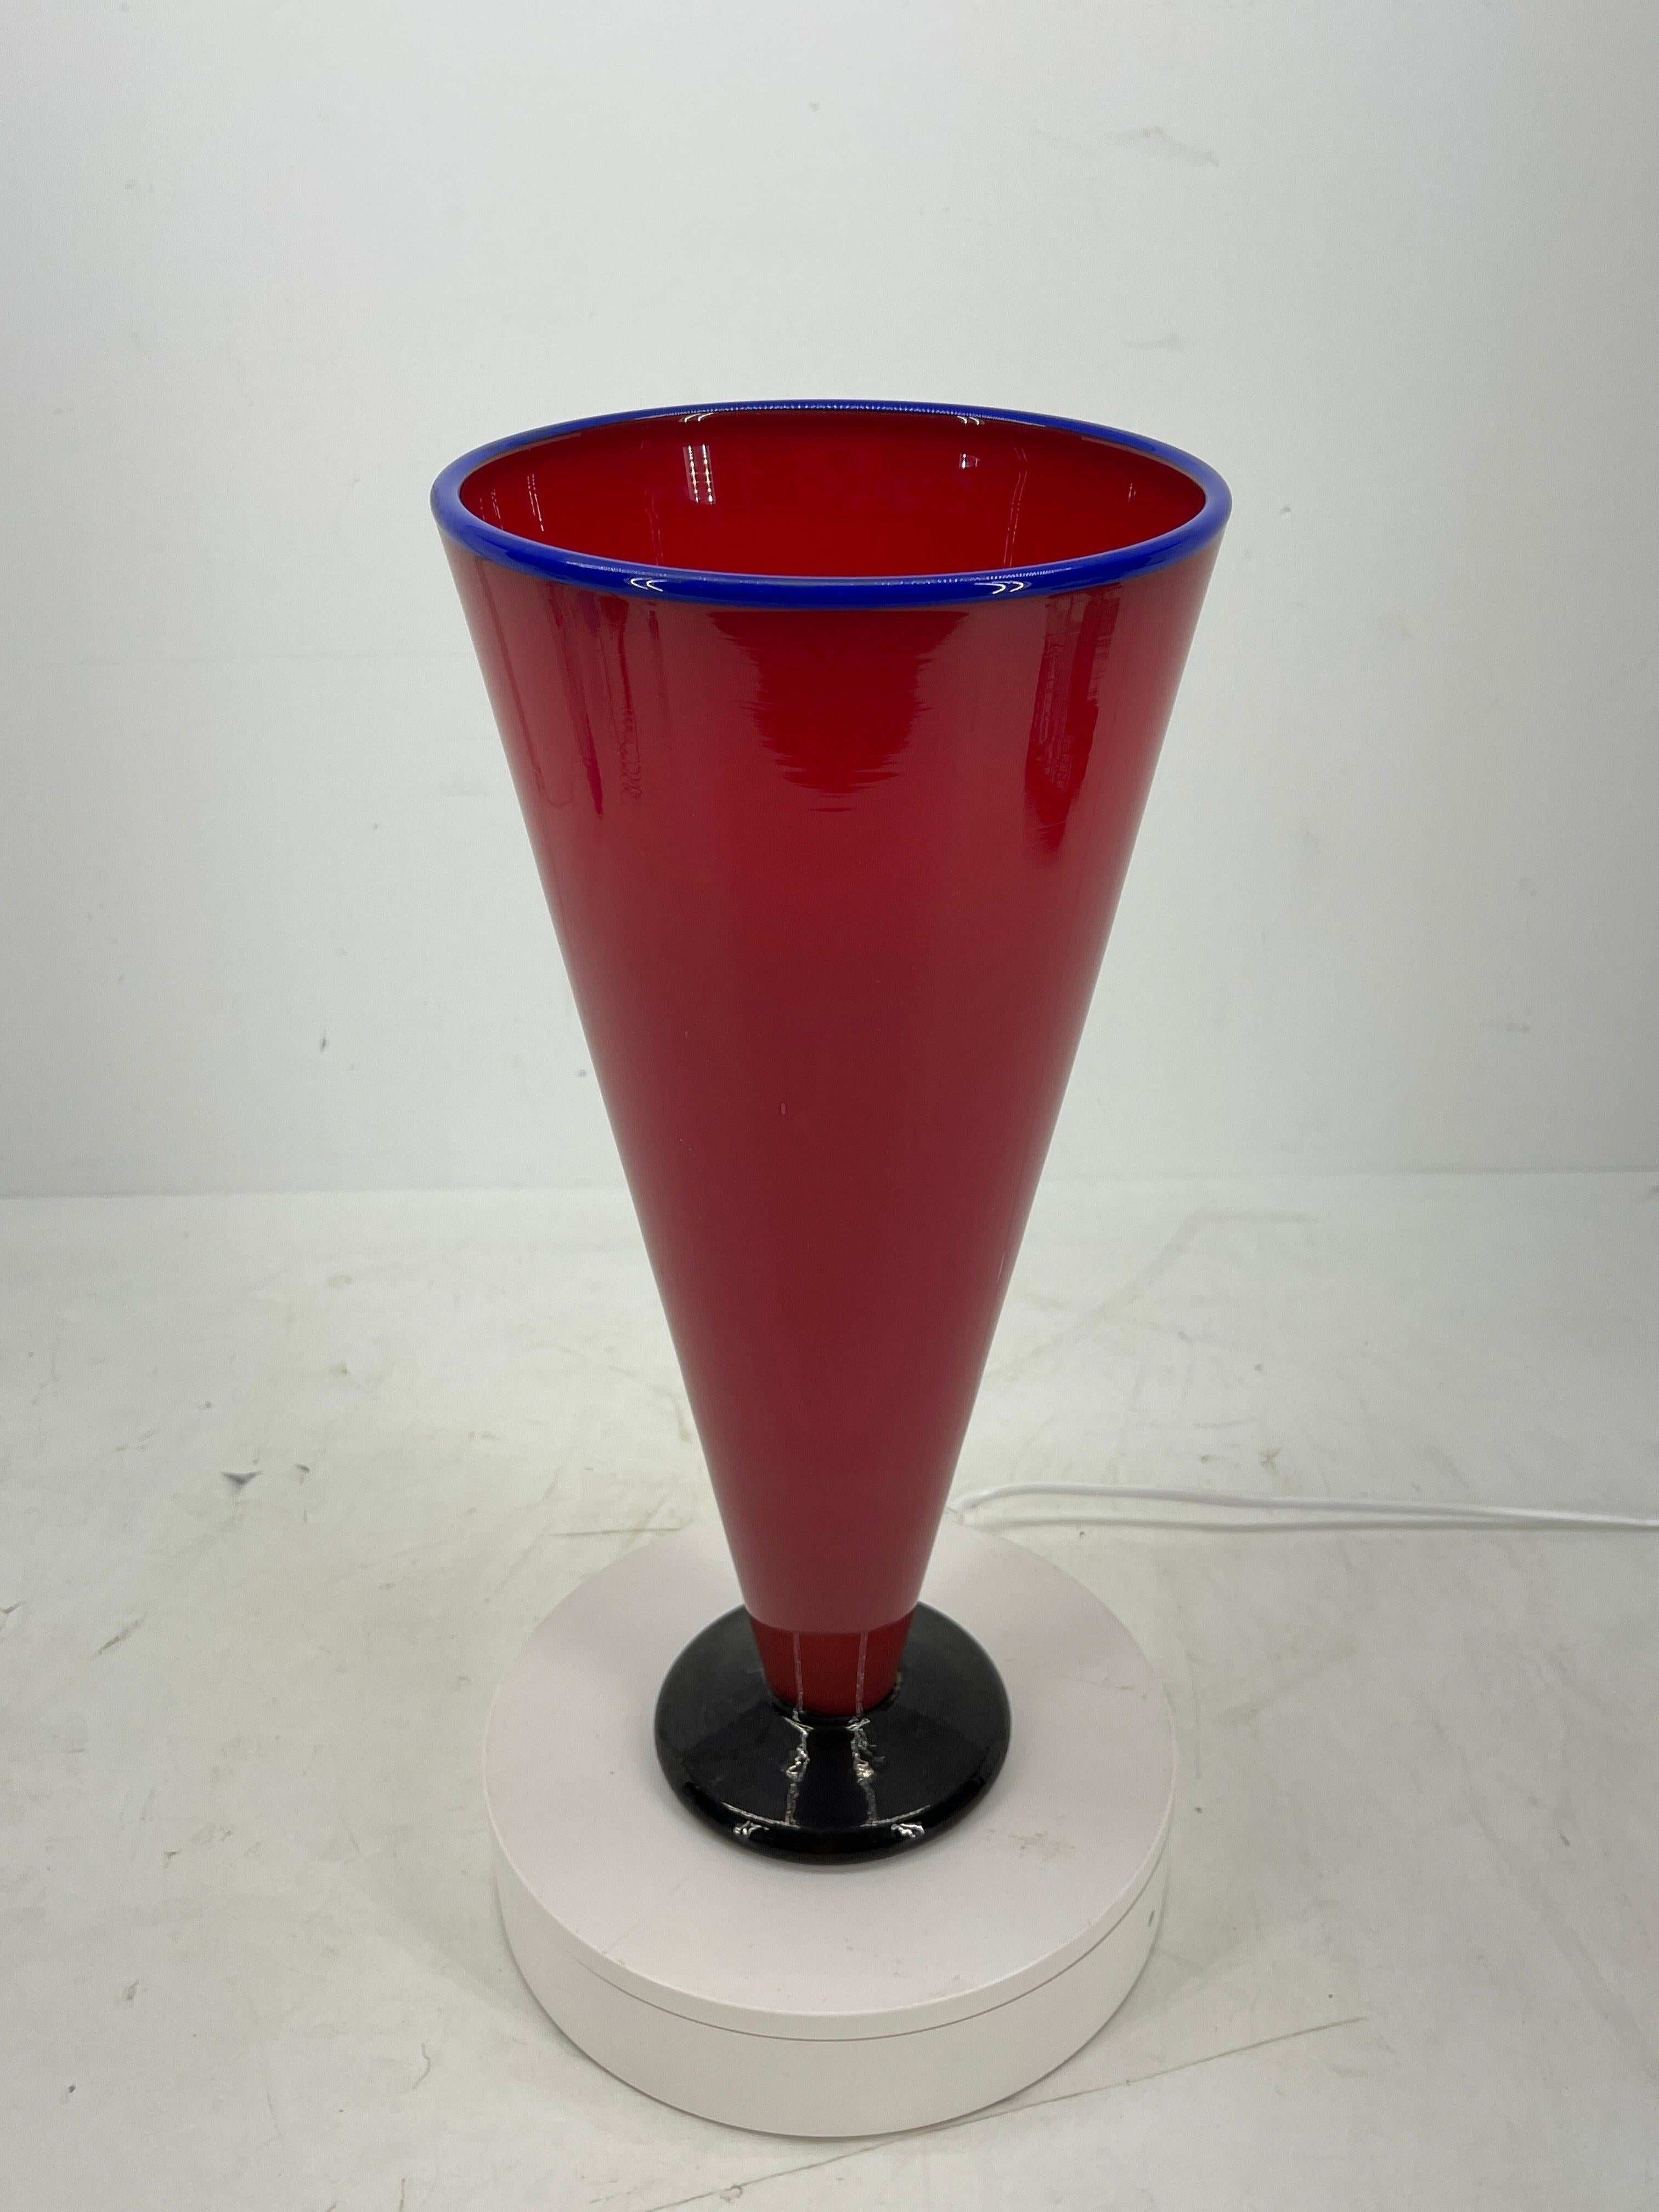 Modern red and blue handblown glass vase. This tall vase is rich red with cobalt blue colored rim. The black base meets the red glass making the vase striking and modern. It is large enough to grace a table as a centerpiece or display anywhere you